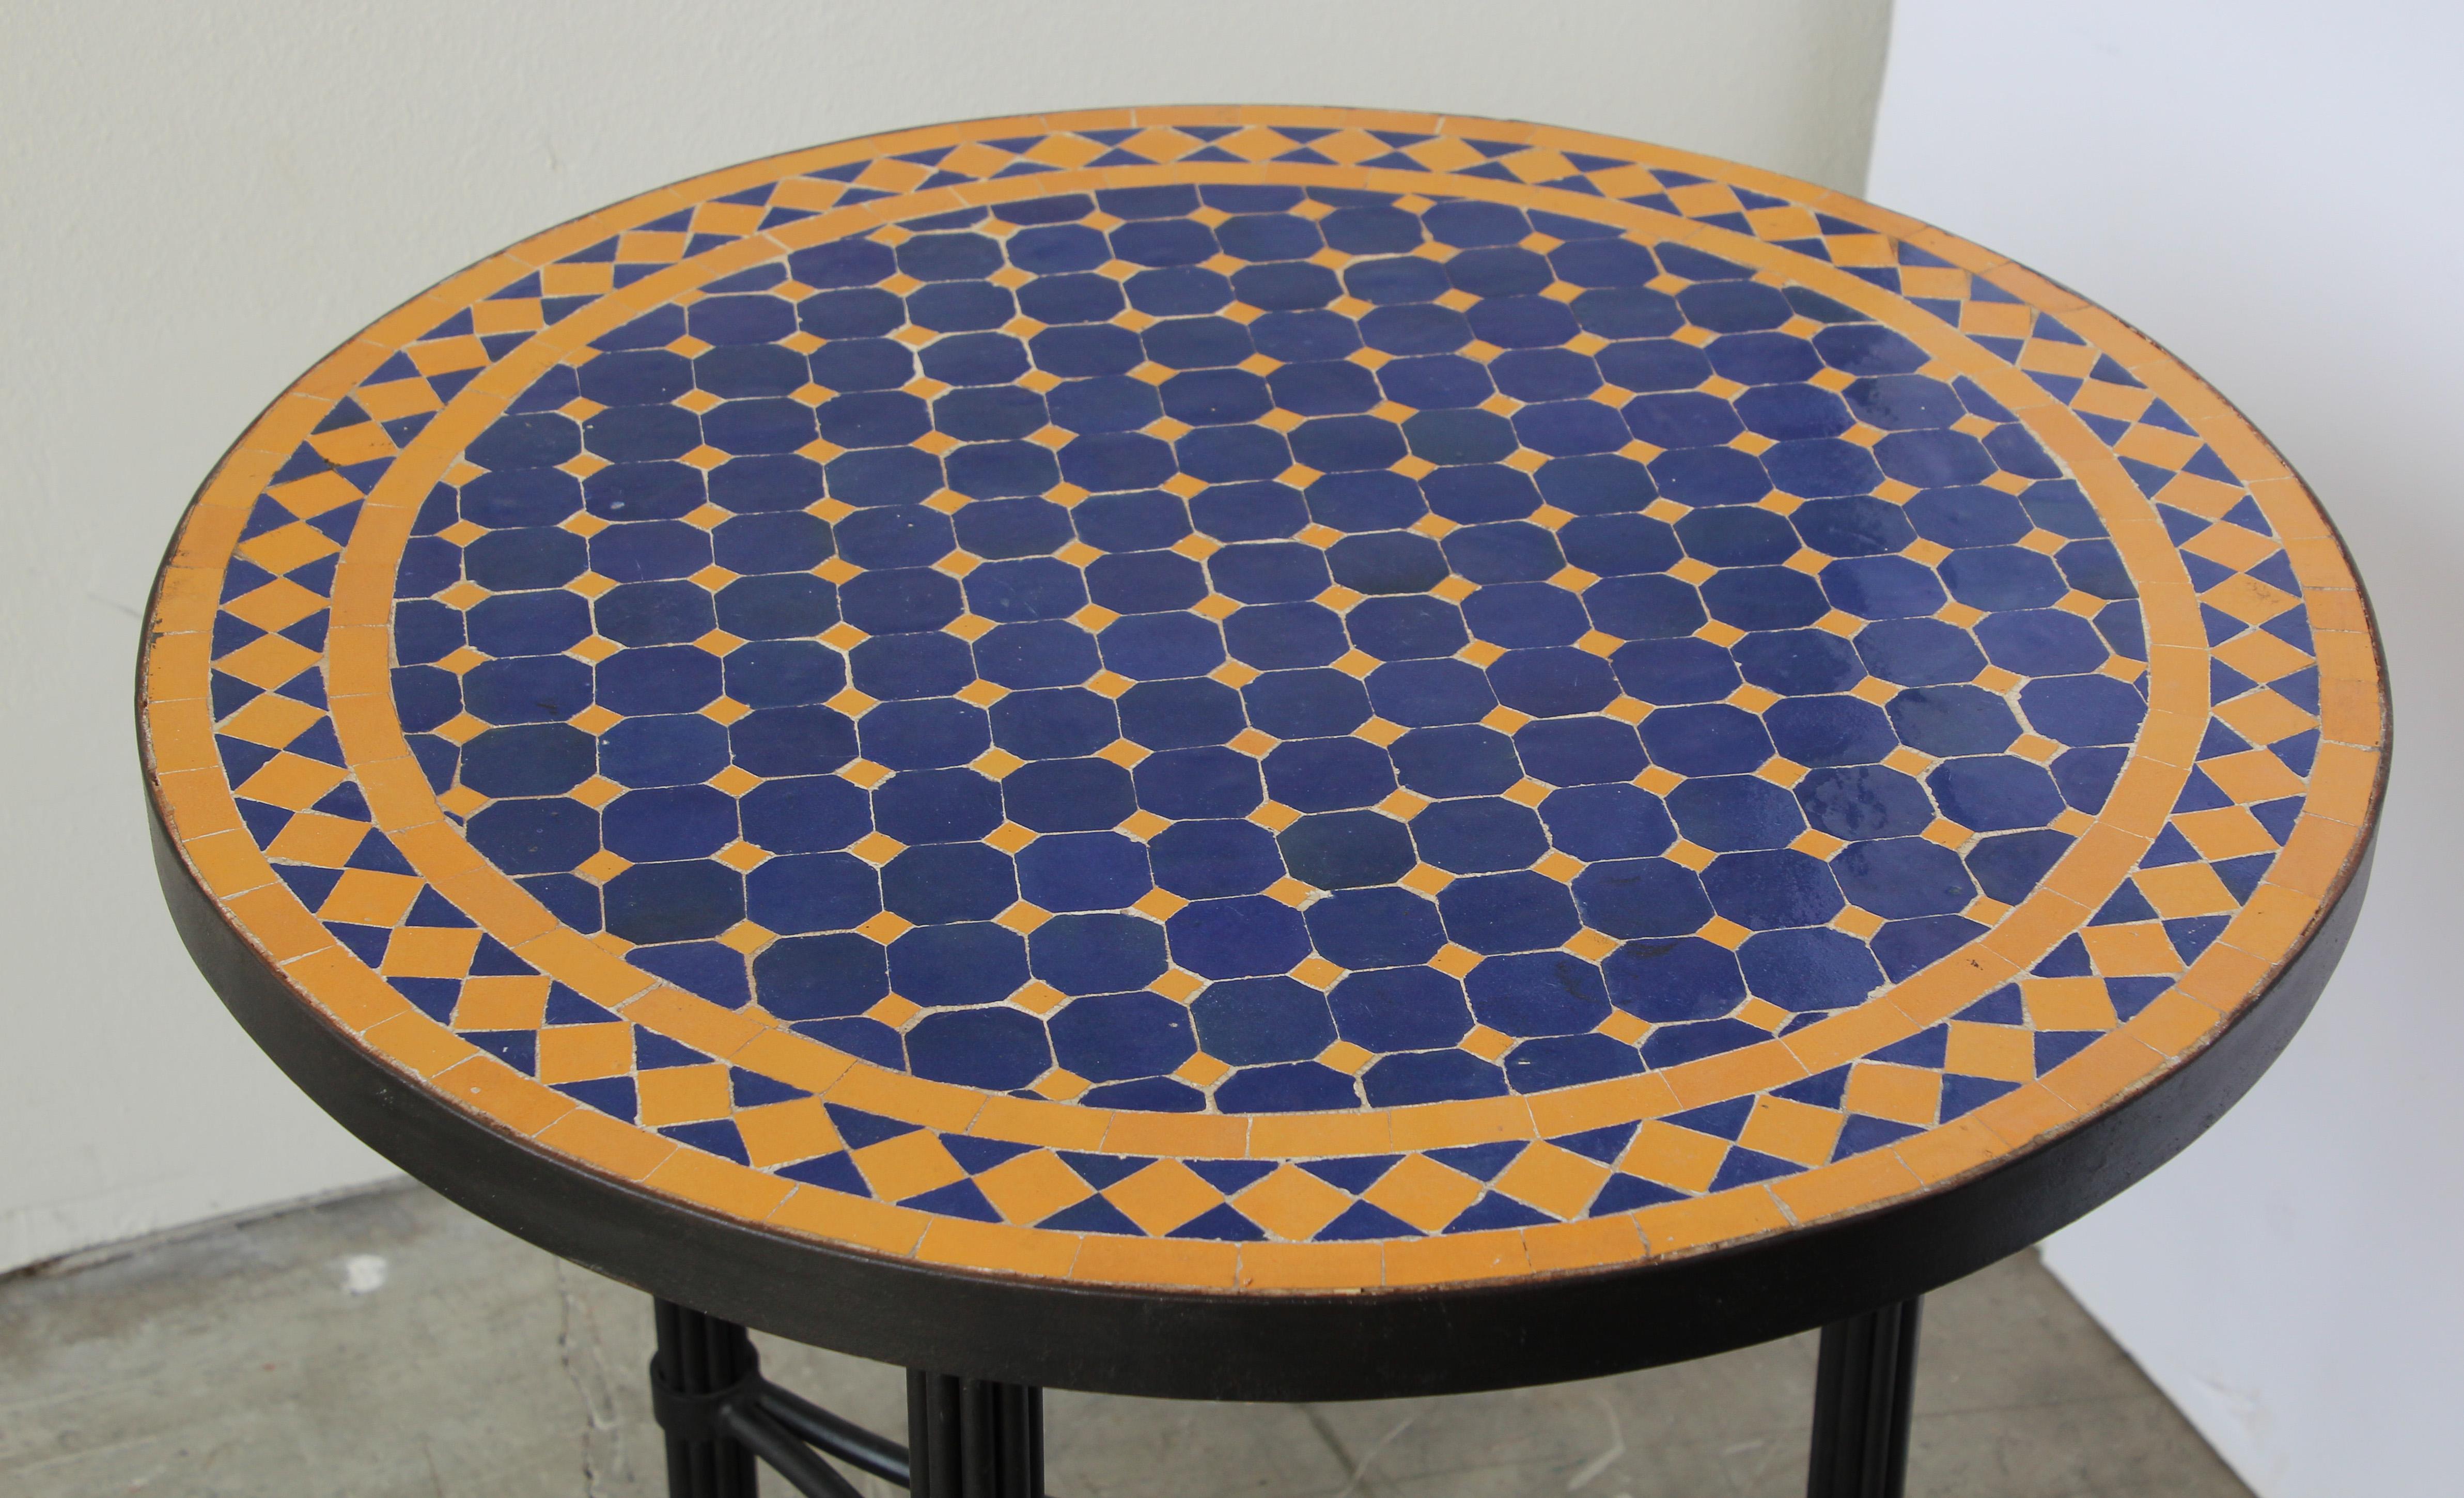 Moroccan Mosaic Tiles Cobalt Blue and Yellow Colors Side Table 1